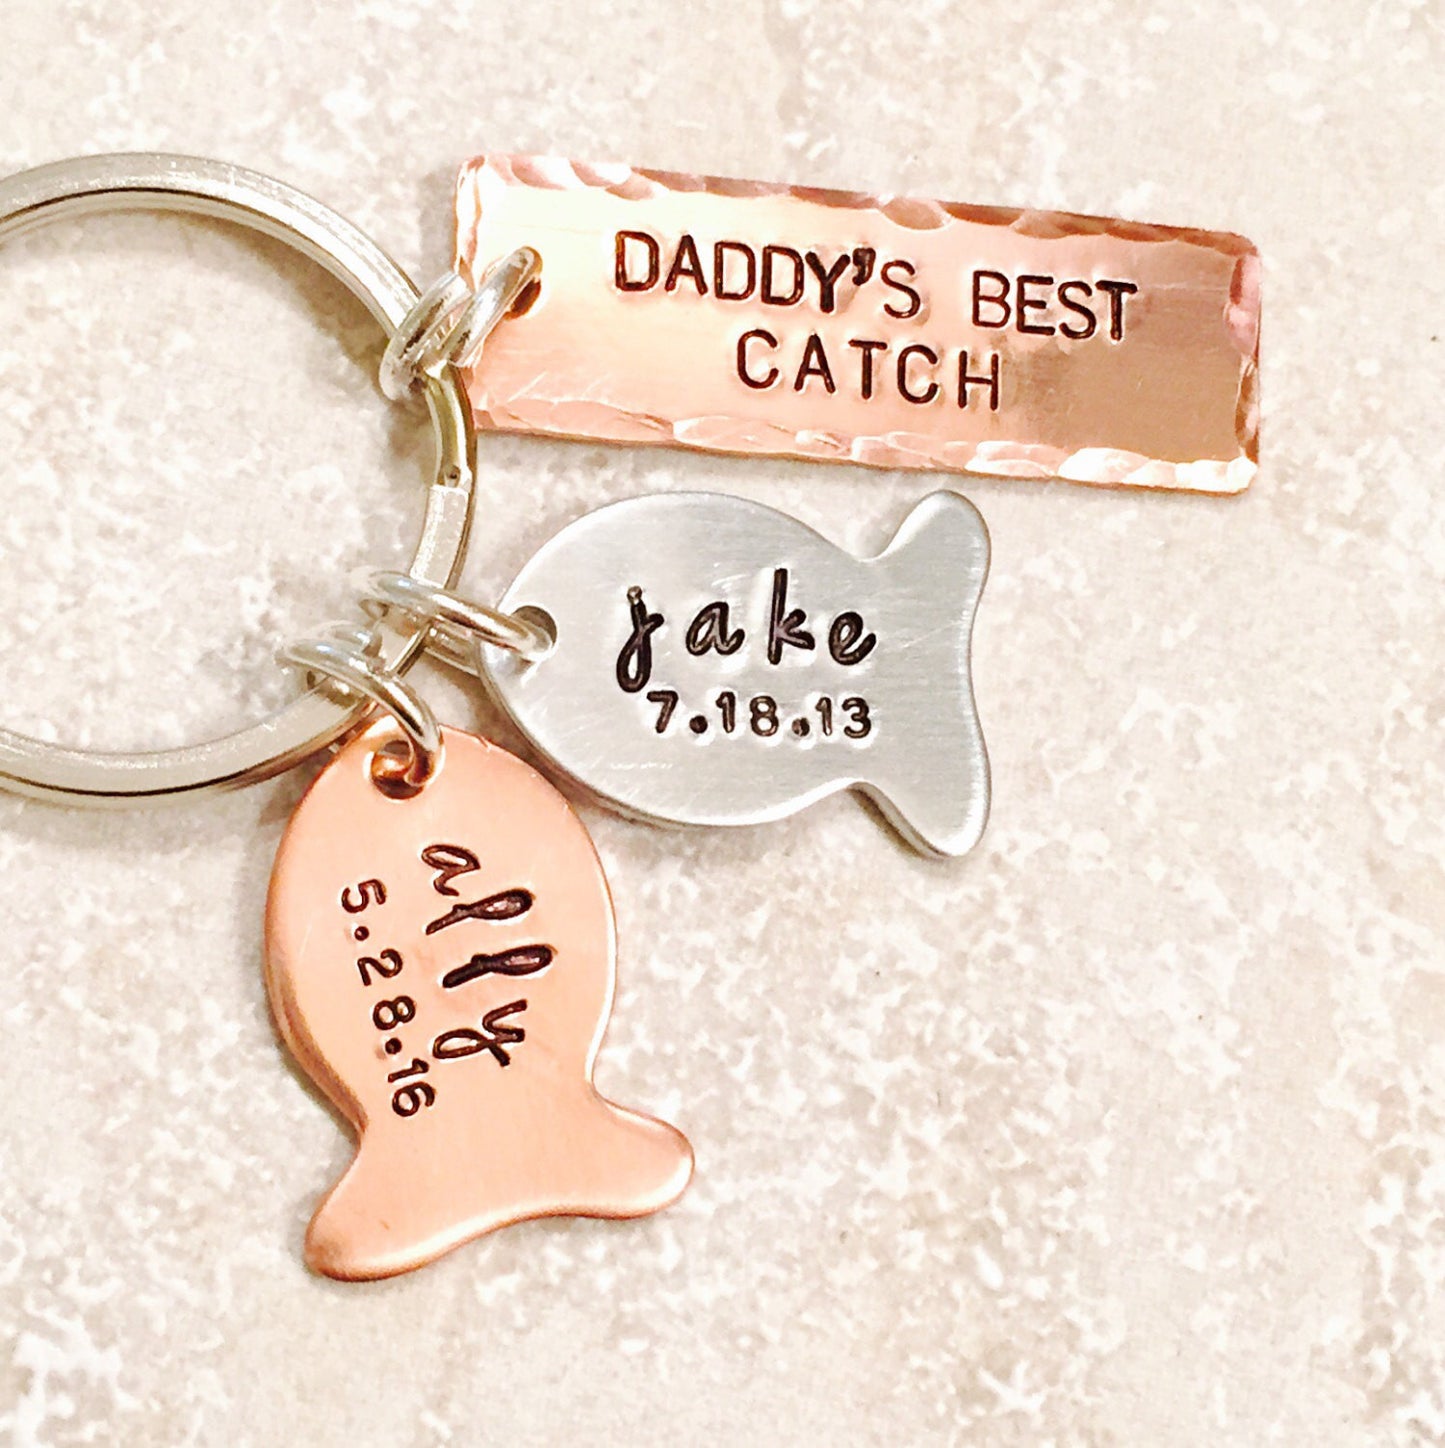 Hooked On Dad,Fishing Keychain, Our Best Catch Dad, Fish Keychain, Boyfriend Gift, Fishing, natashaaloha - Natashaaloha, jewelry, bracelets, necklace, keychains, fishing lures, gifts for men, charms, personalized, 